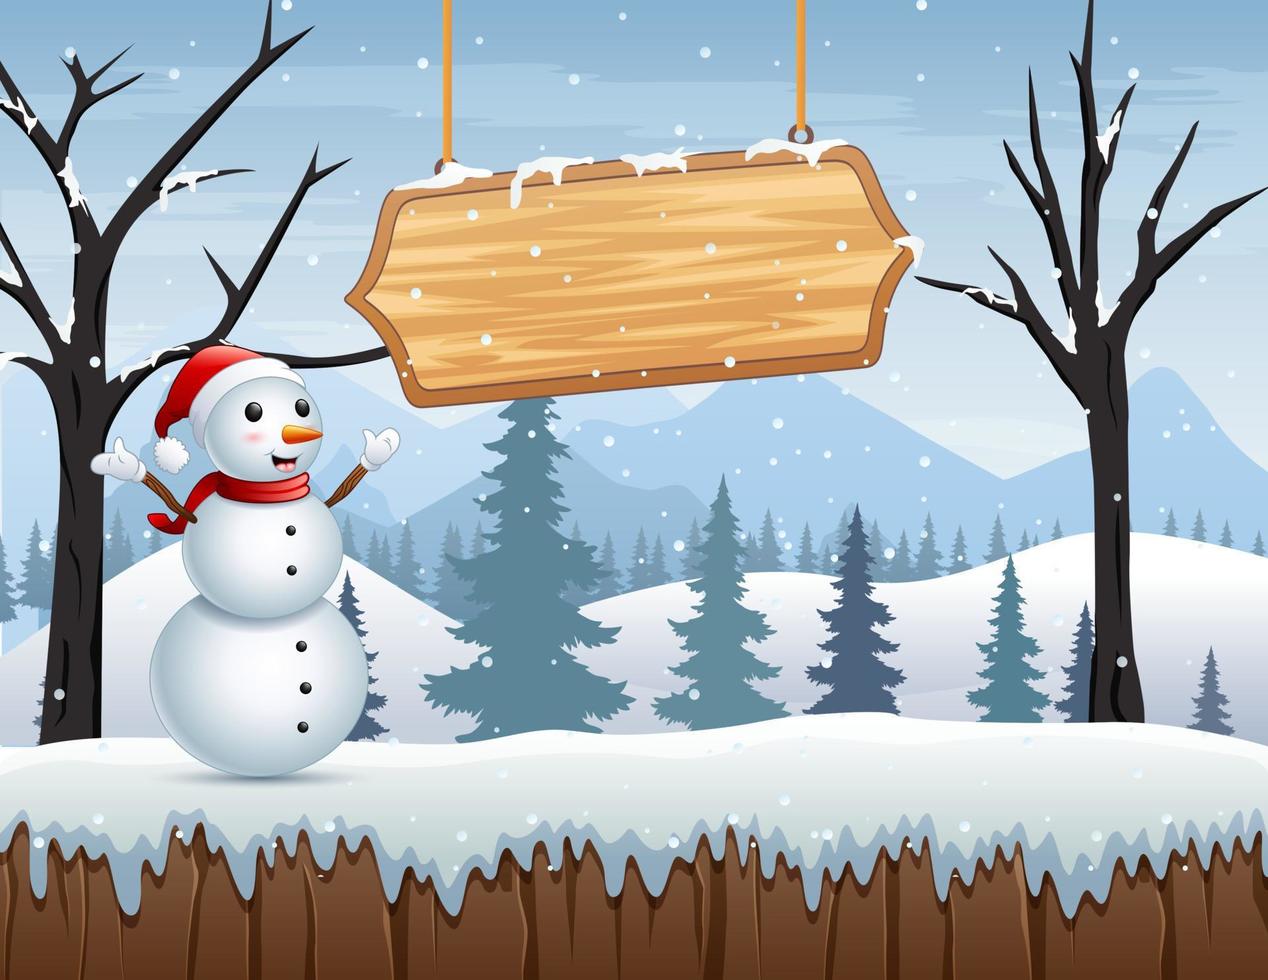 Winter landscape with a snowman and wooden sign vector